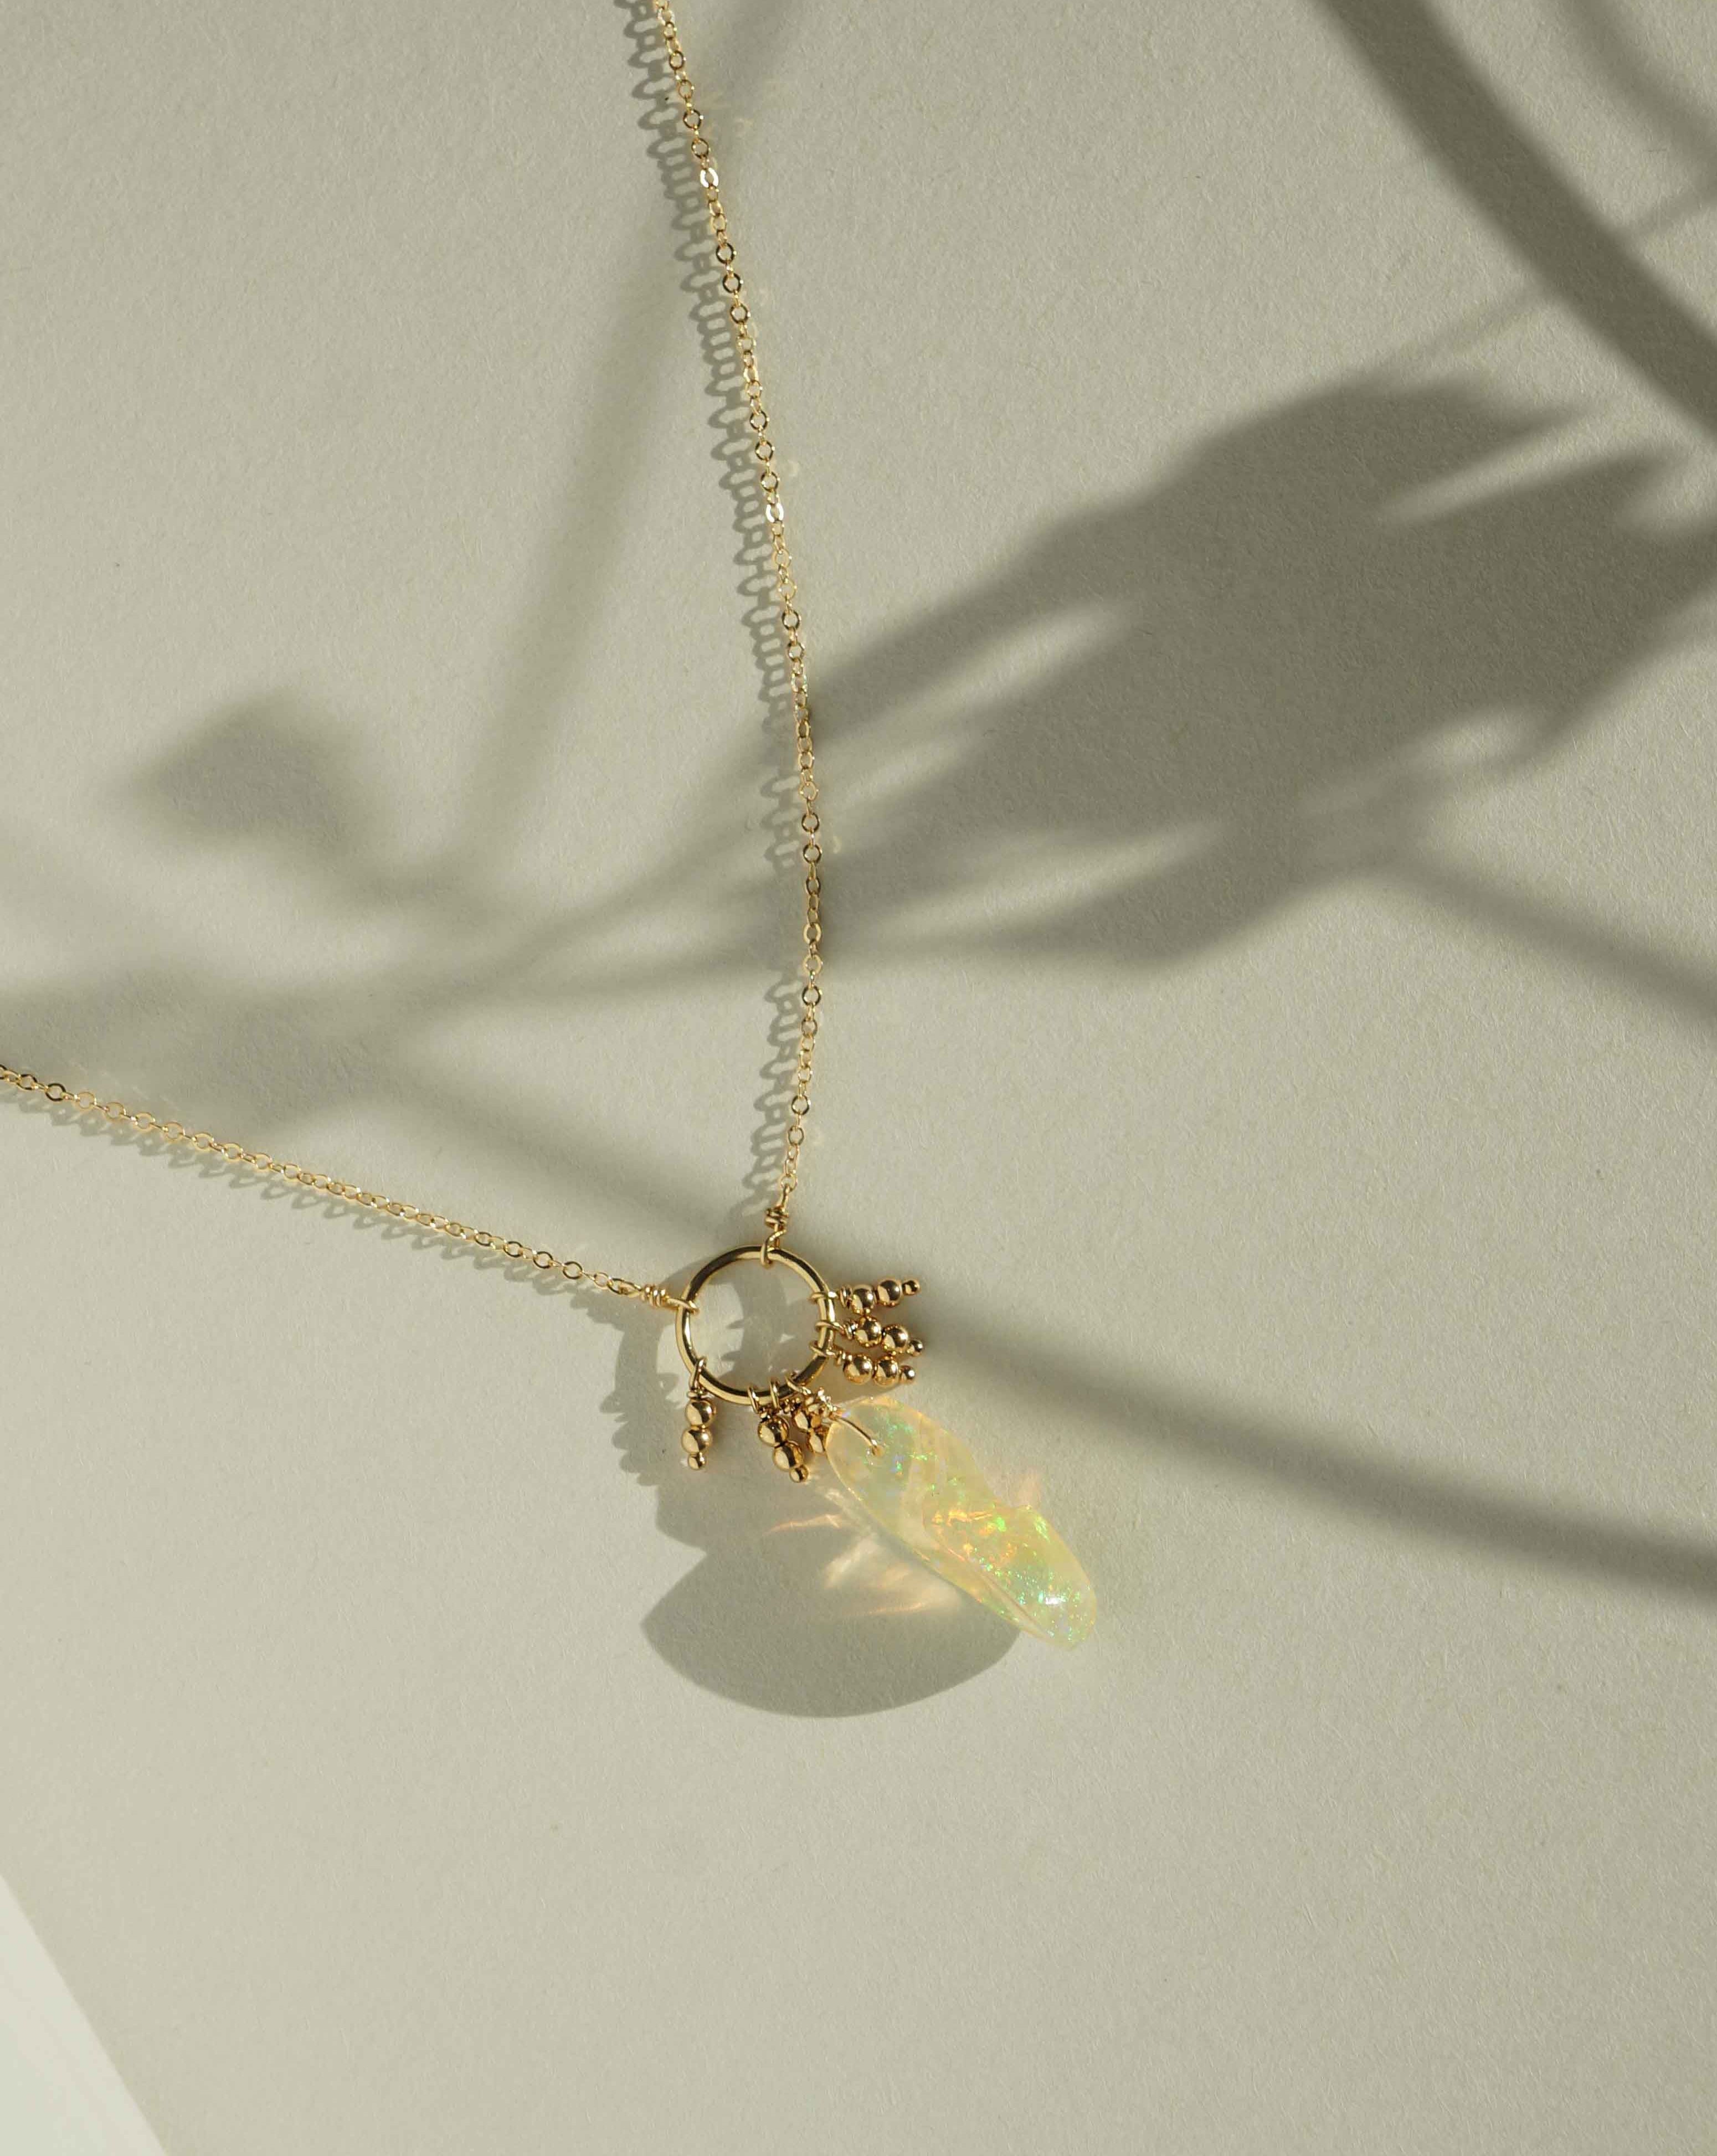 Mella Necklace by KOZAKH. A 16 to 18 inch adjustable length necklace, crafted in 14K Gold Filled, featuring an organic shaped Ethiopian Opal and seamless beads.